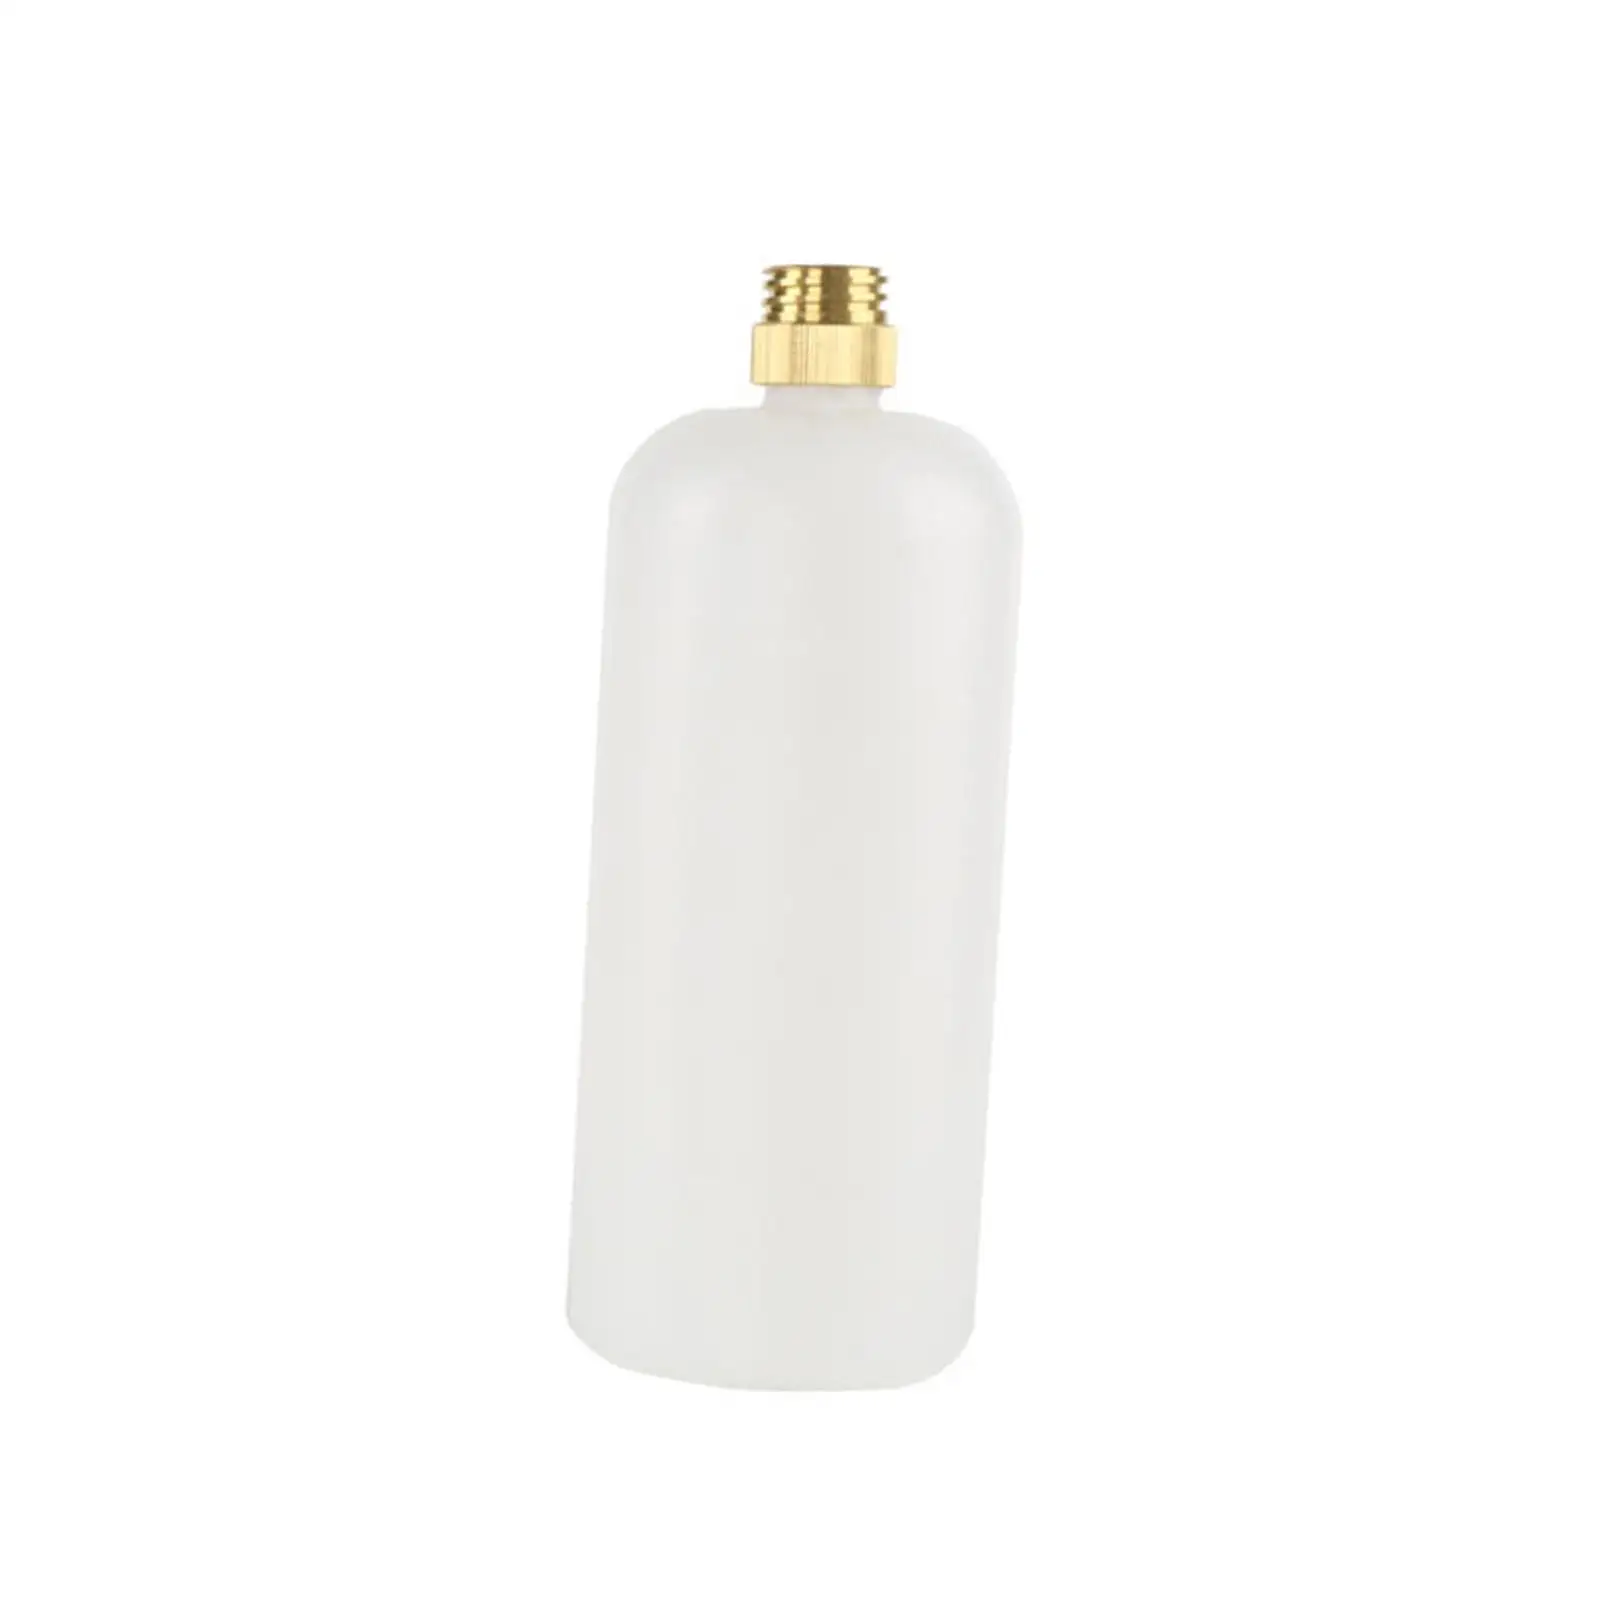 Car Foam Sprayer Bottle Large Capacity with Copper Adapter 1L Tank Container for Snow Foam Lance Pressure Washer Accessories